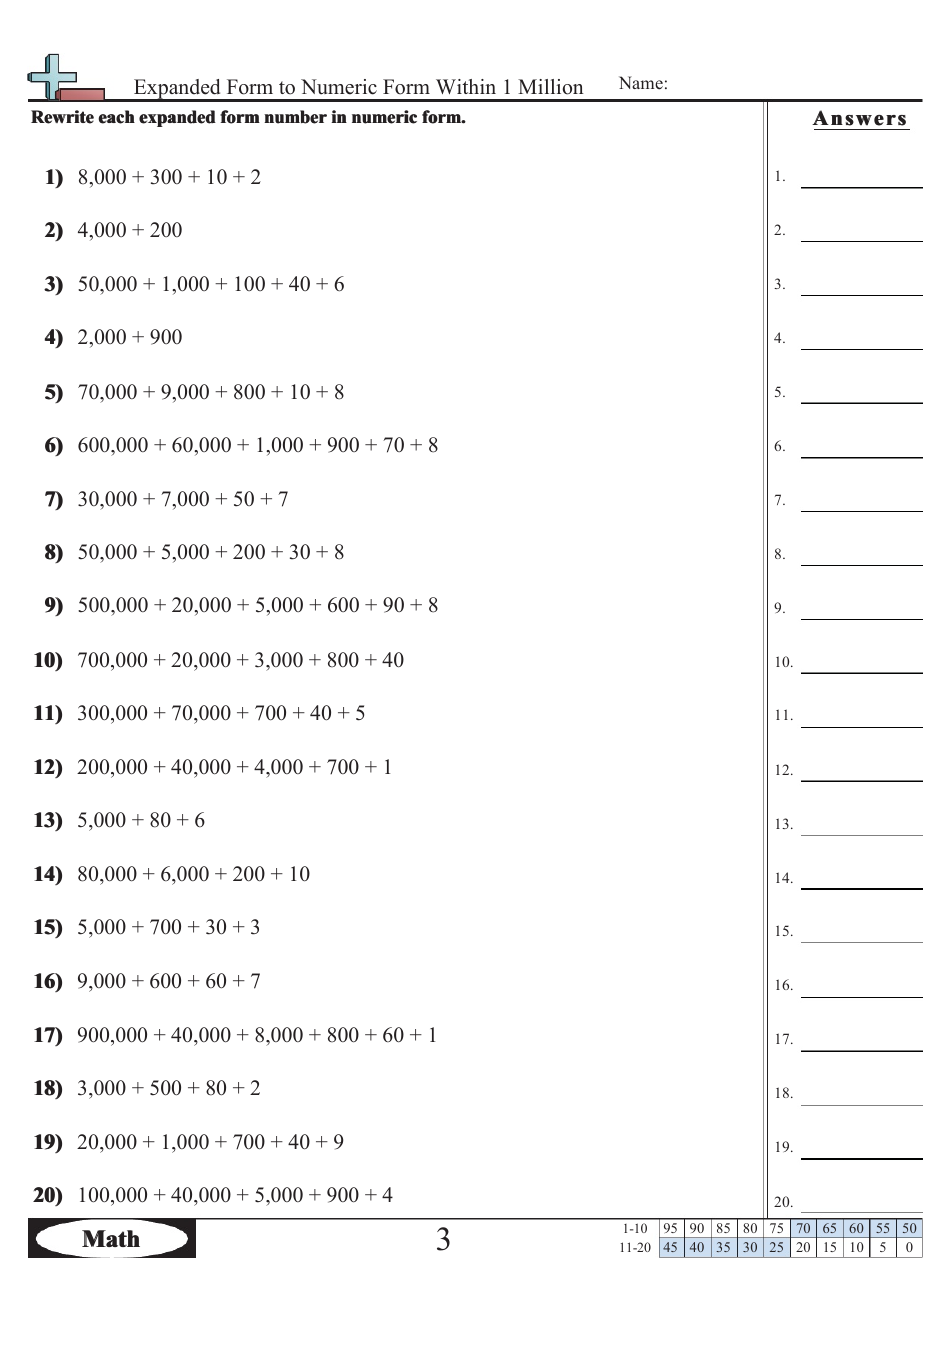 Expanded Form to Numeric Form Within 1 Million Worksheet With Answers - 8,312, Page 1